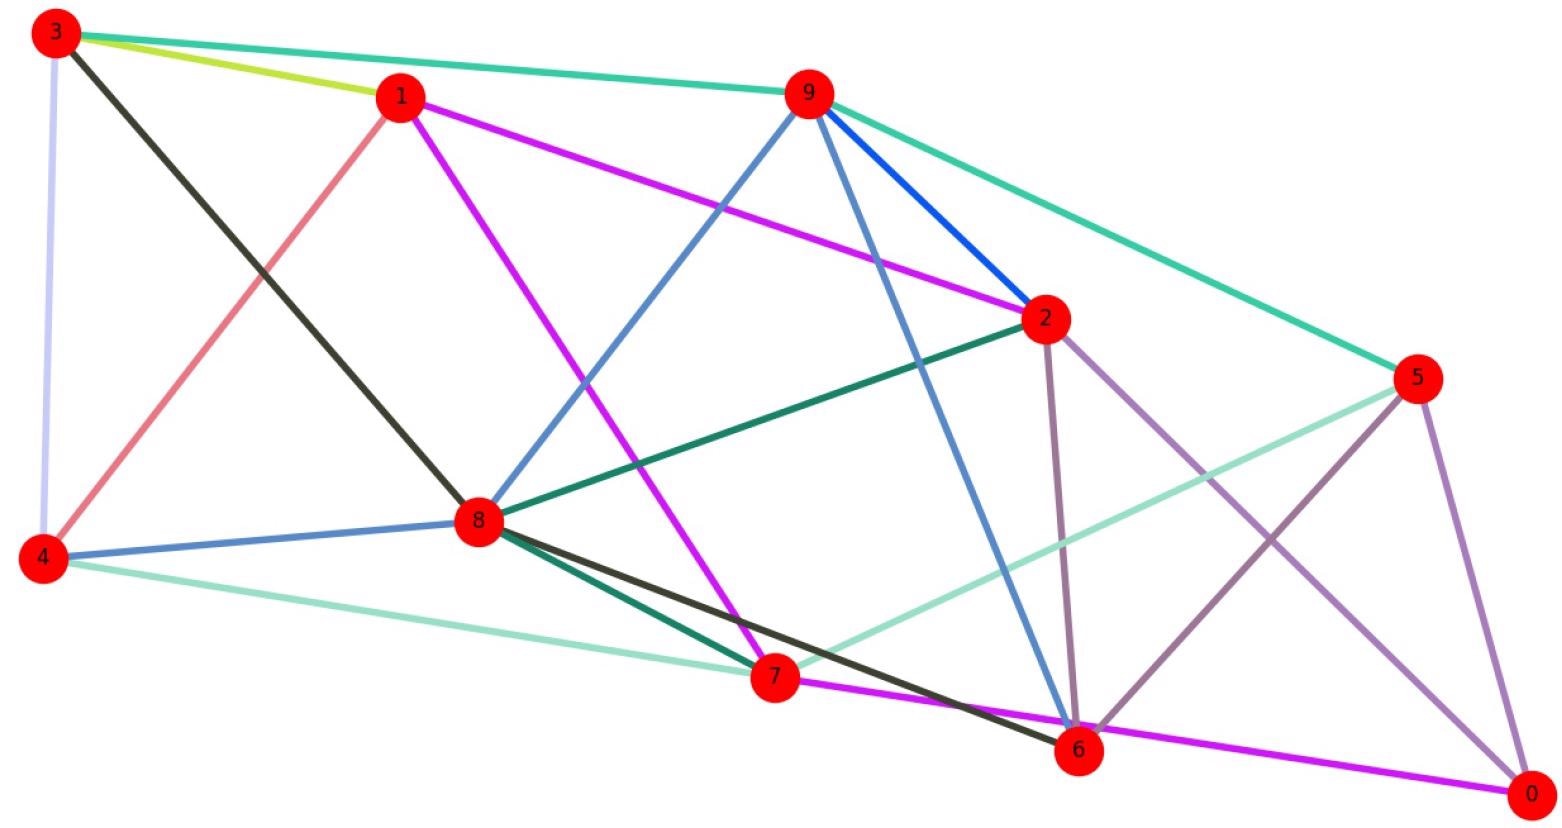 Example of network model for